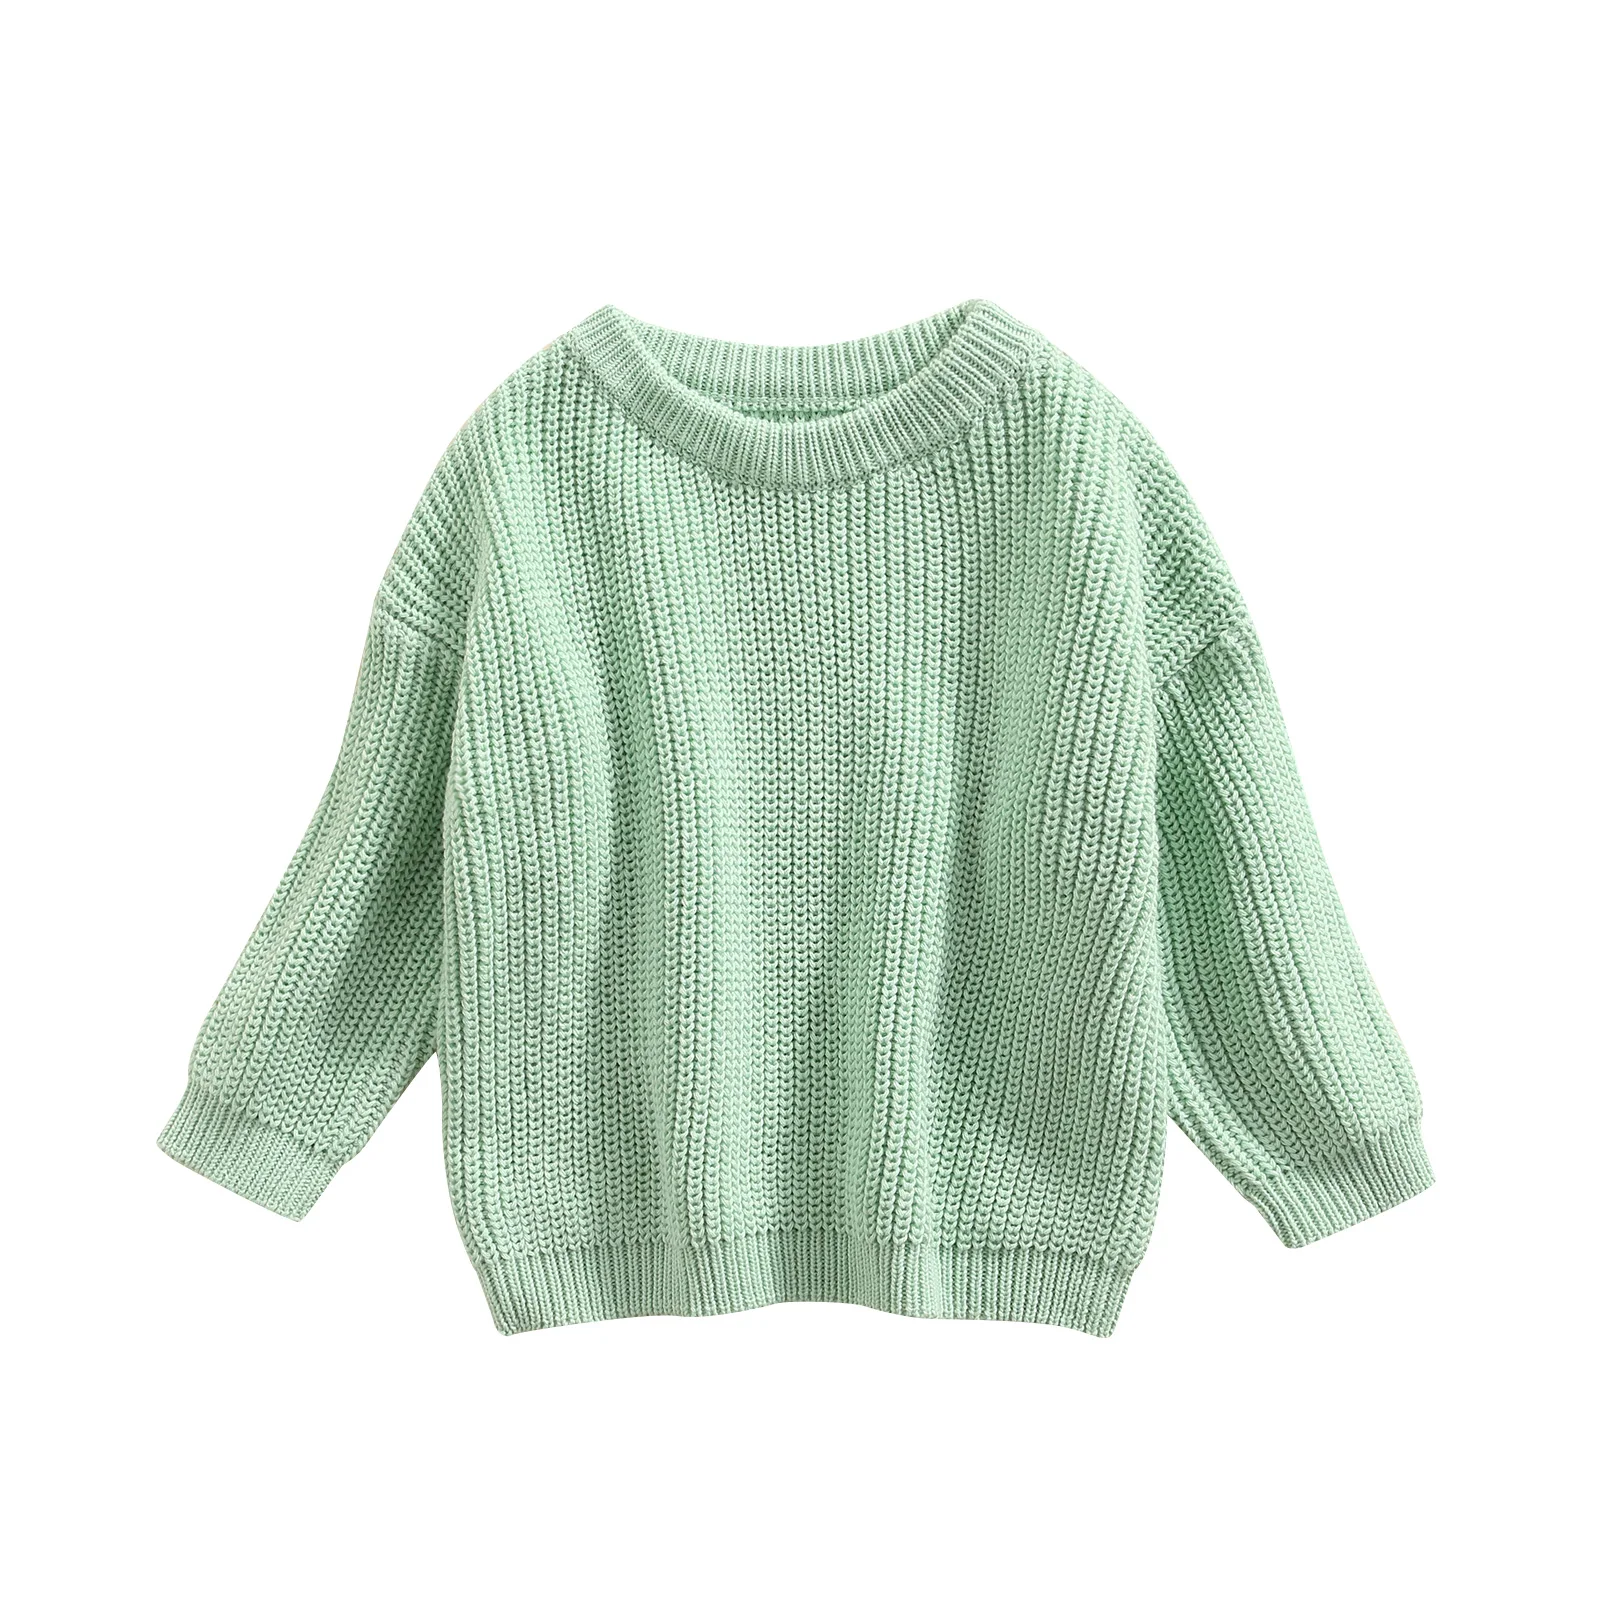 Baby Sweater Toddler Knit Sweater Newborn Knitwear Autumn New Baby Boys Girls ClothesLong Sleeve Cotton Baby Pullover Tops 0-9M images - 6